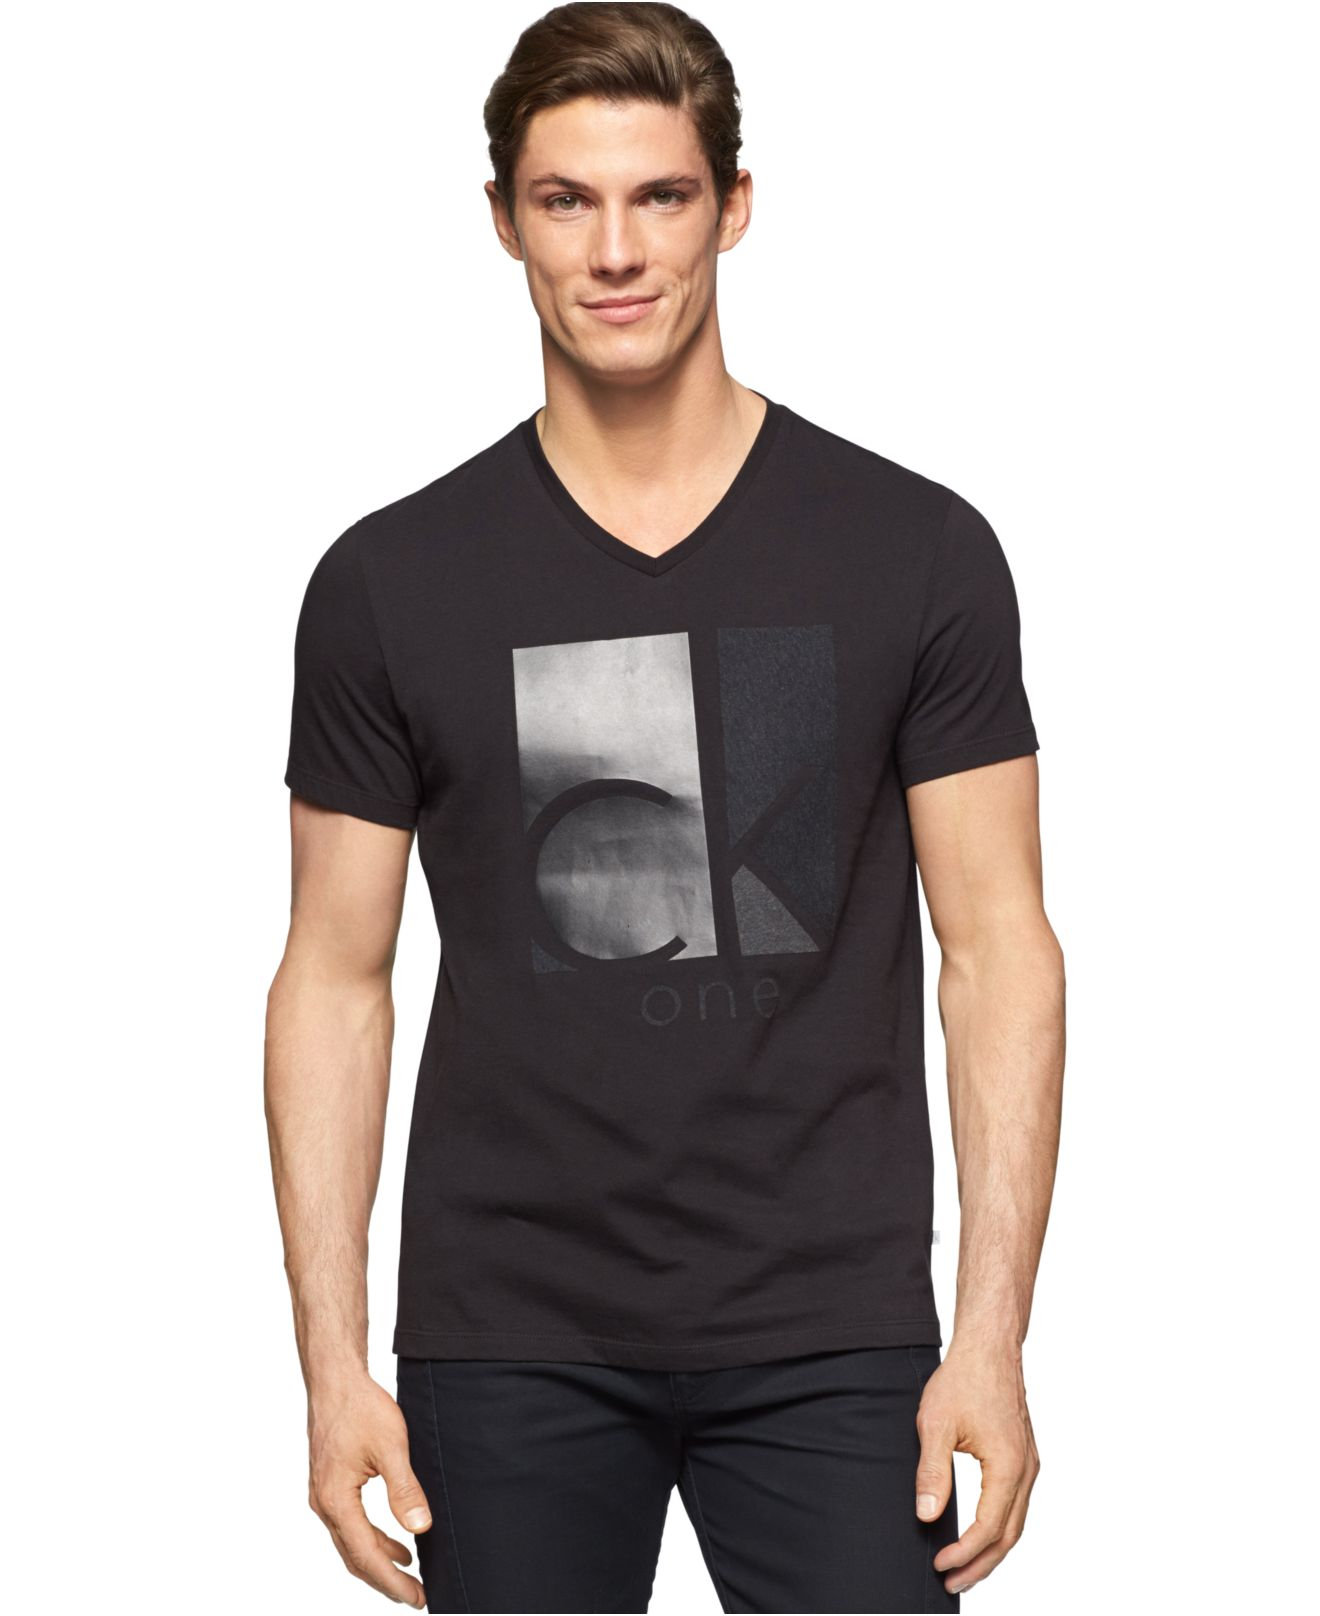 Lyst - Calvin klein Ck One Mixed Media Graphic V-neck T-shirt in Black ...